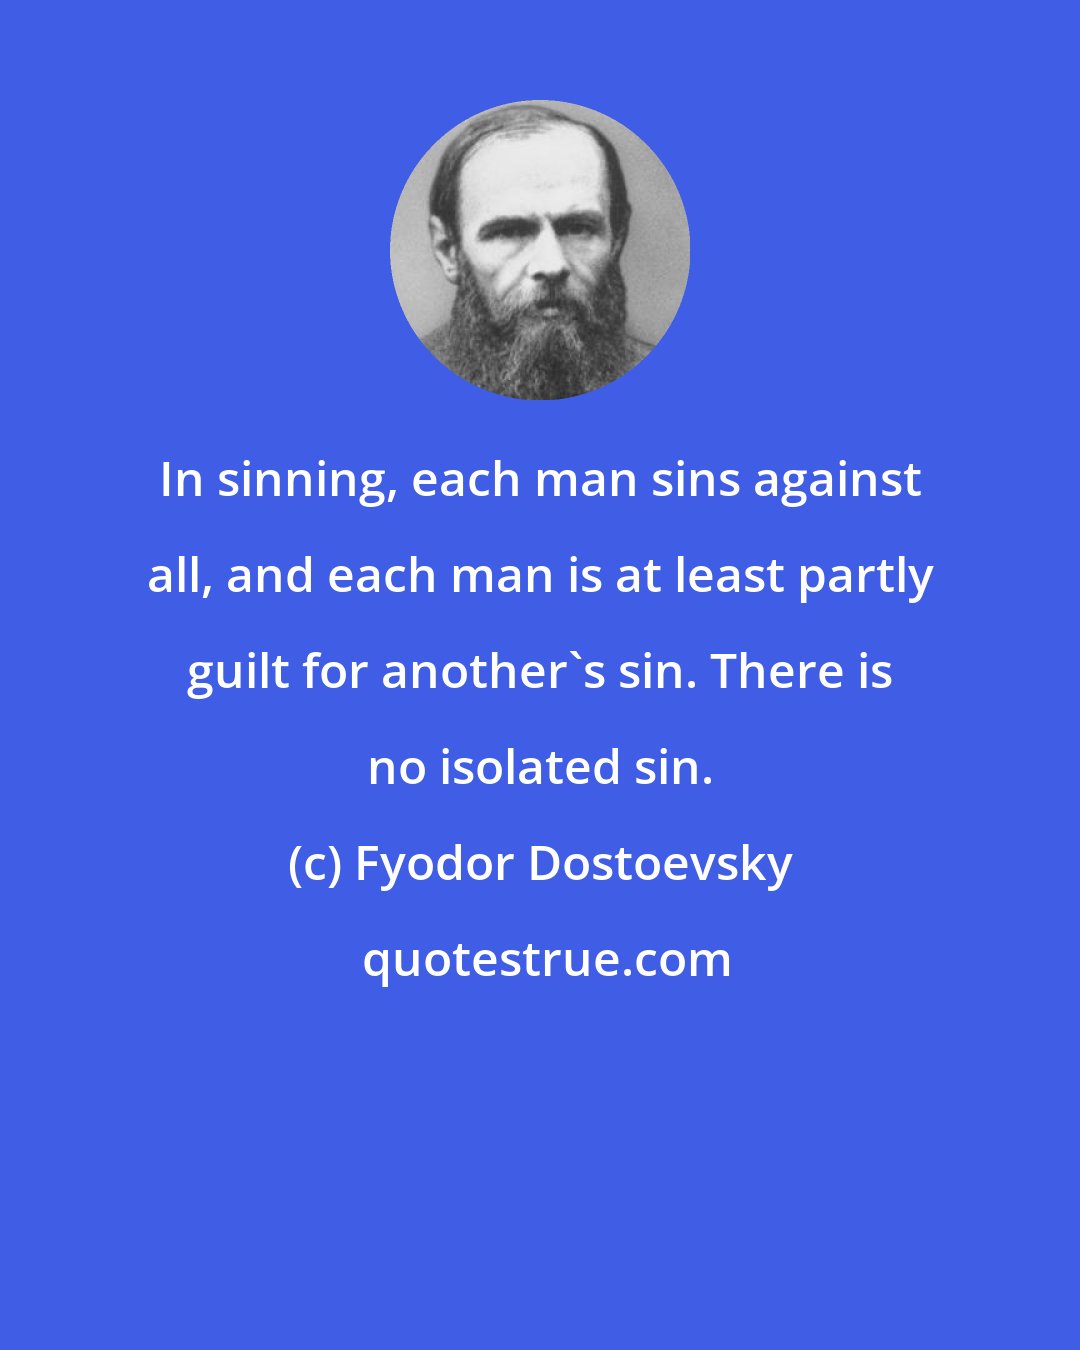 Fyodor Dostoevsky: In sinning, each man sins against all, and each man is at least partly guilt for another's sin. There is no isolated sin.